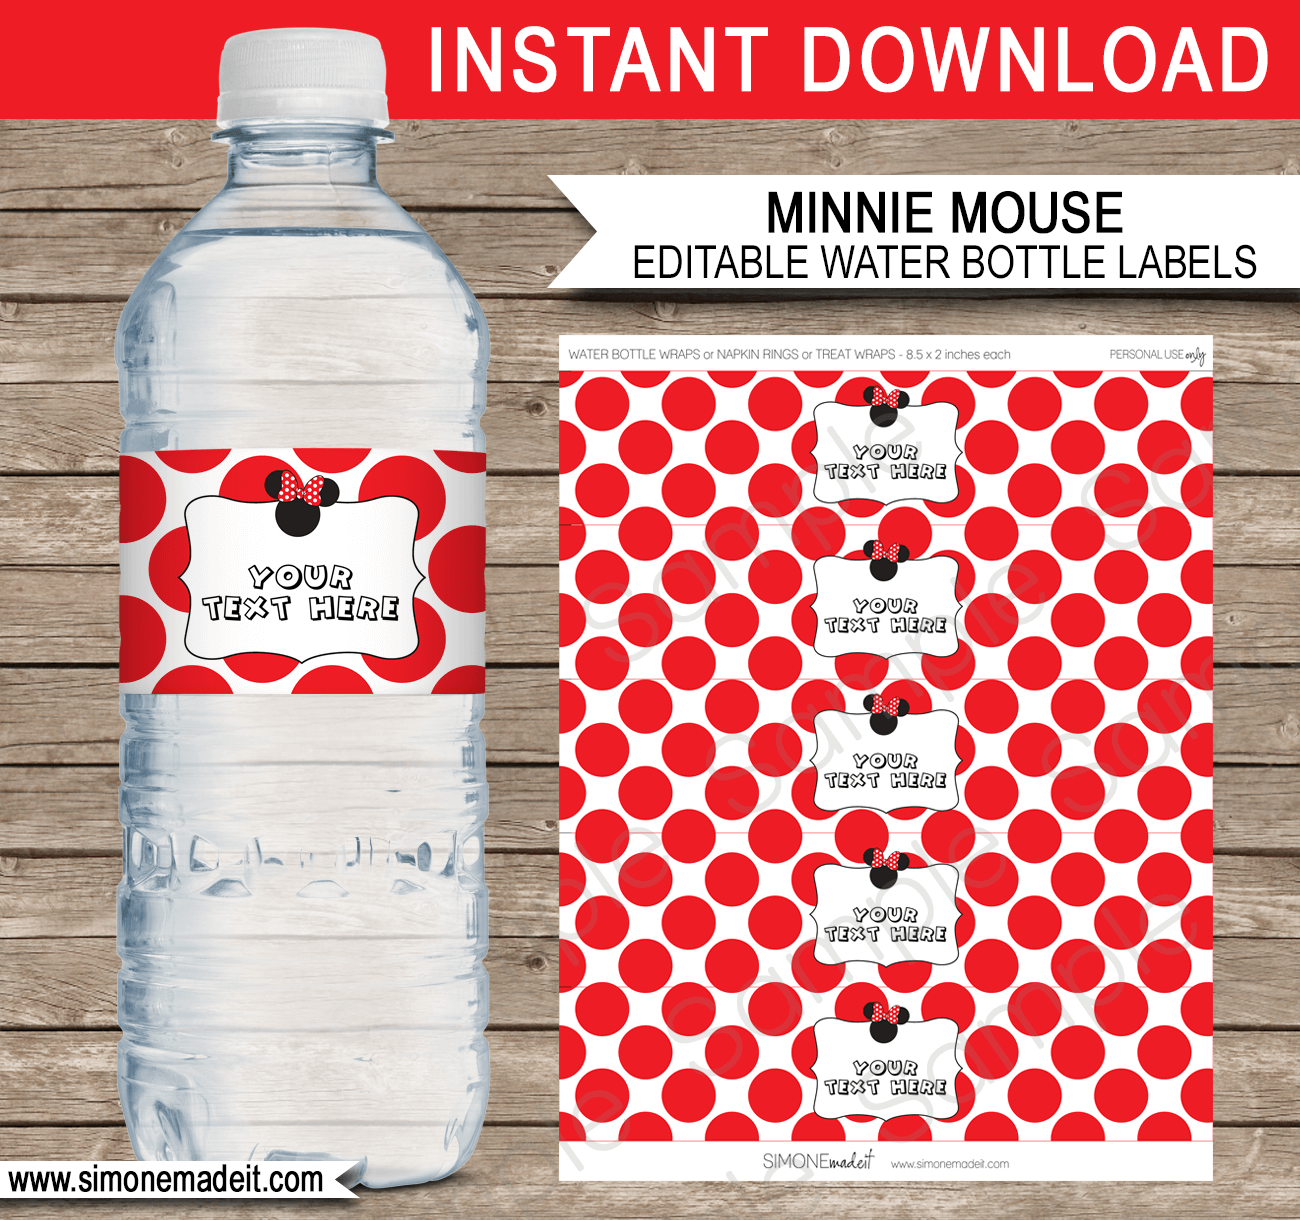 https://www.simonemadeit.com/wp-content/uploads/edd/2017/03/Minnie-Mouse-Party-Water-Bottle-Labels-Printable-Template-red-2.png